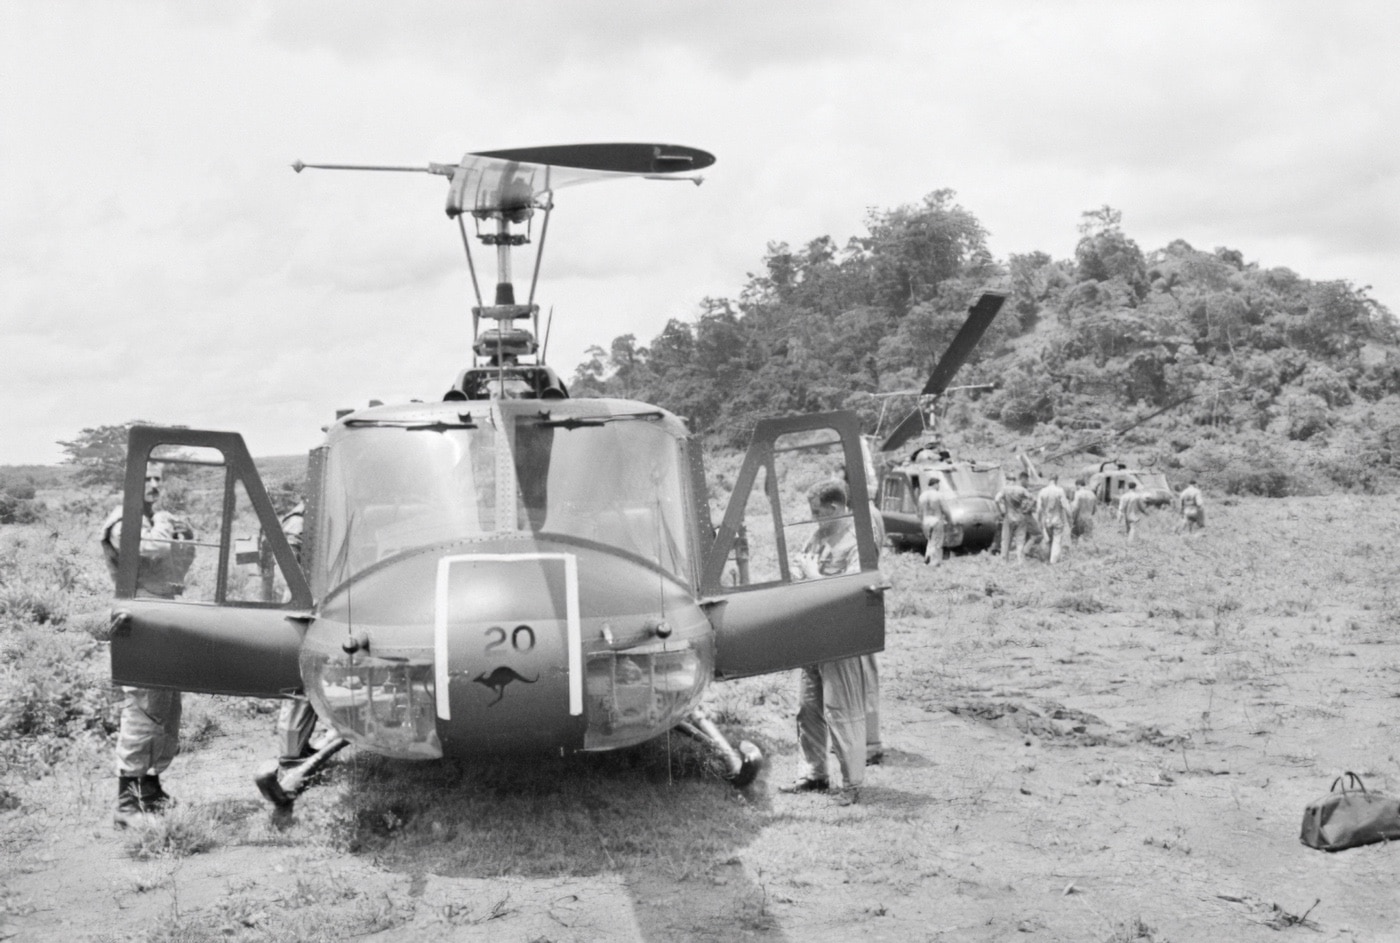 UH-1 Iroquois "Huey" helicopters of No 9 Squadron, RAAF, at the Task Force Headquarters preparing for a troop support mission in August 1966.